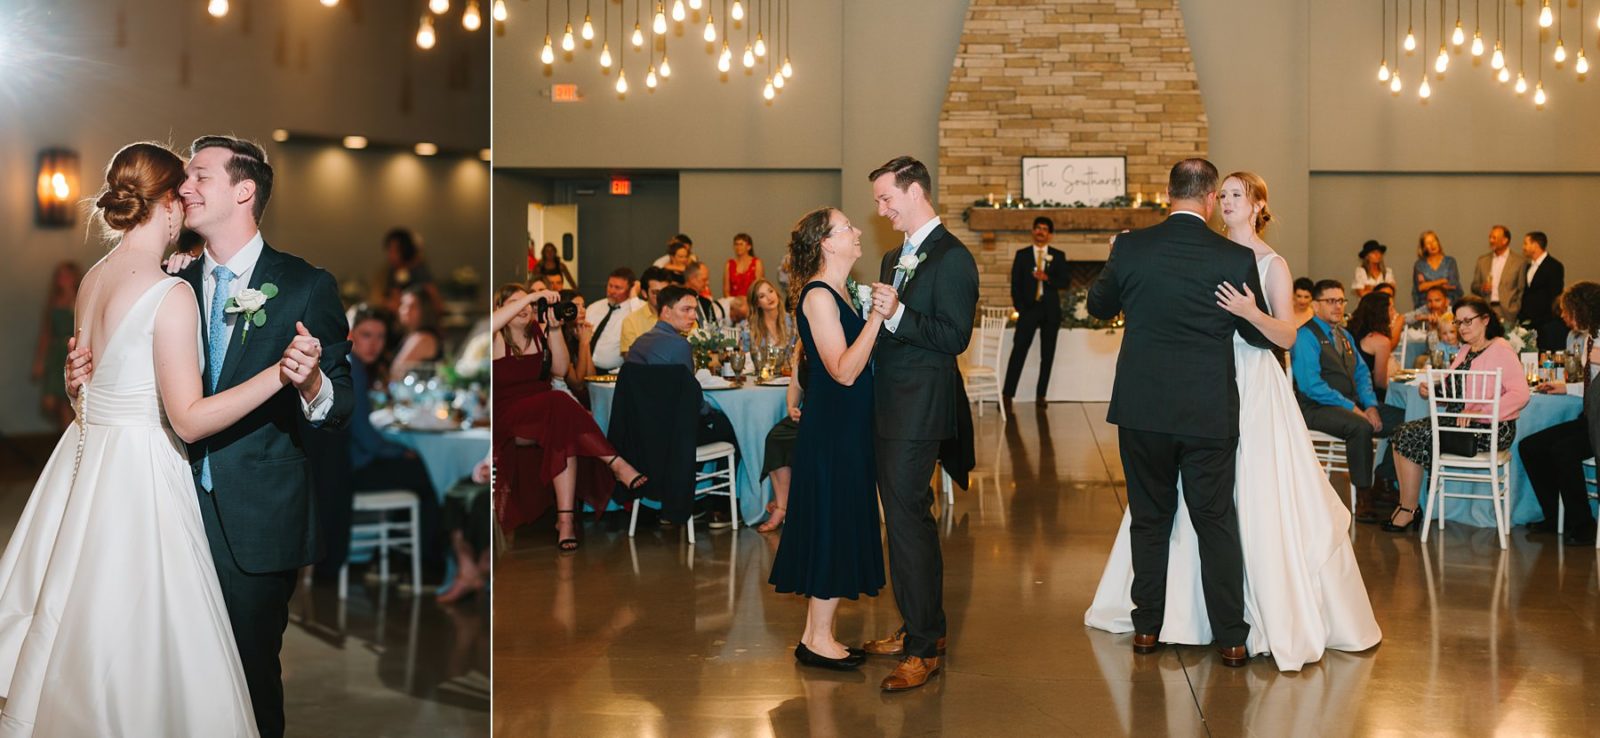 father daughter and mother son dance at the same time for wedding, reception at canyonwood ridge, canyonwood ridge reception photos, canyonwood ridge, canyonwood ridge wedding, dripping springs wedding venue, austin wedding, austin wedding photography, tara lyons photography